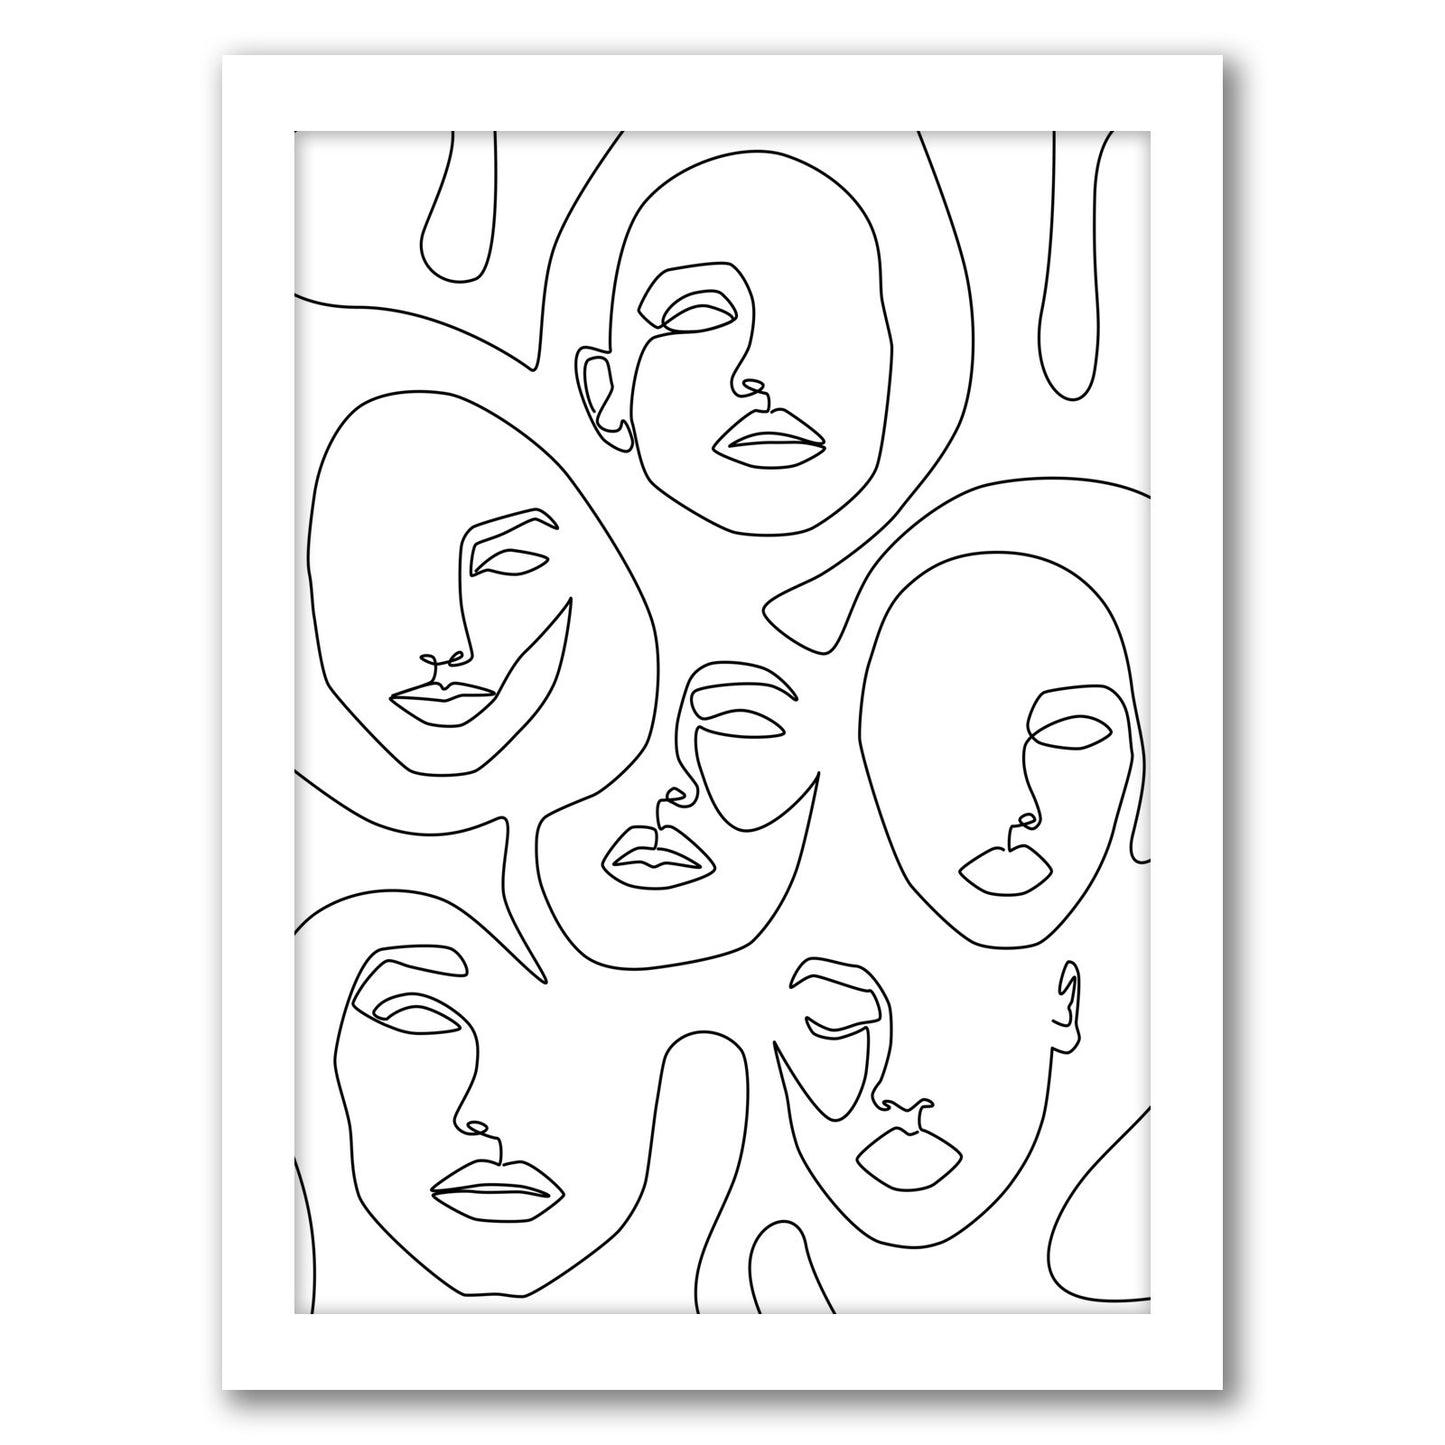 Her And Her by Explicit Design - Framed Print